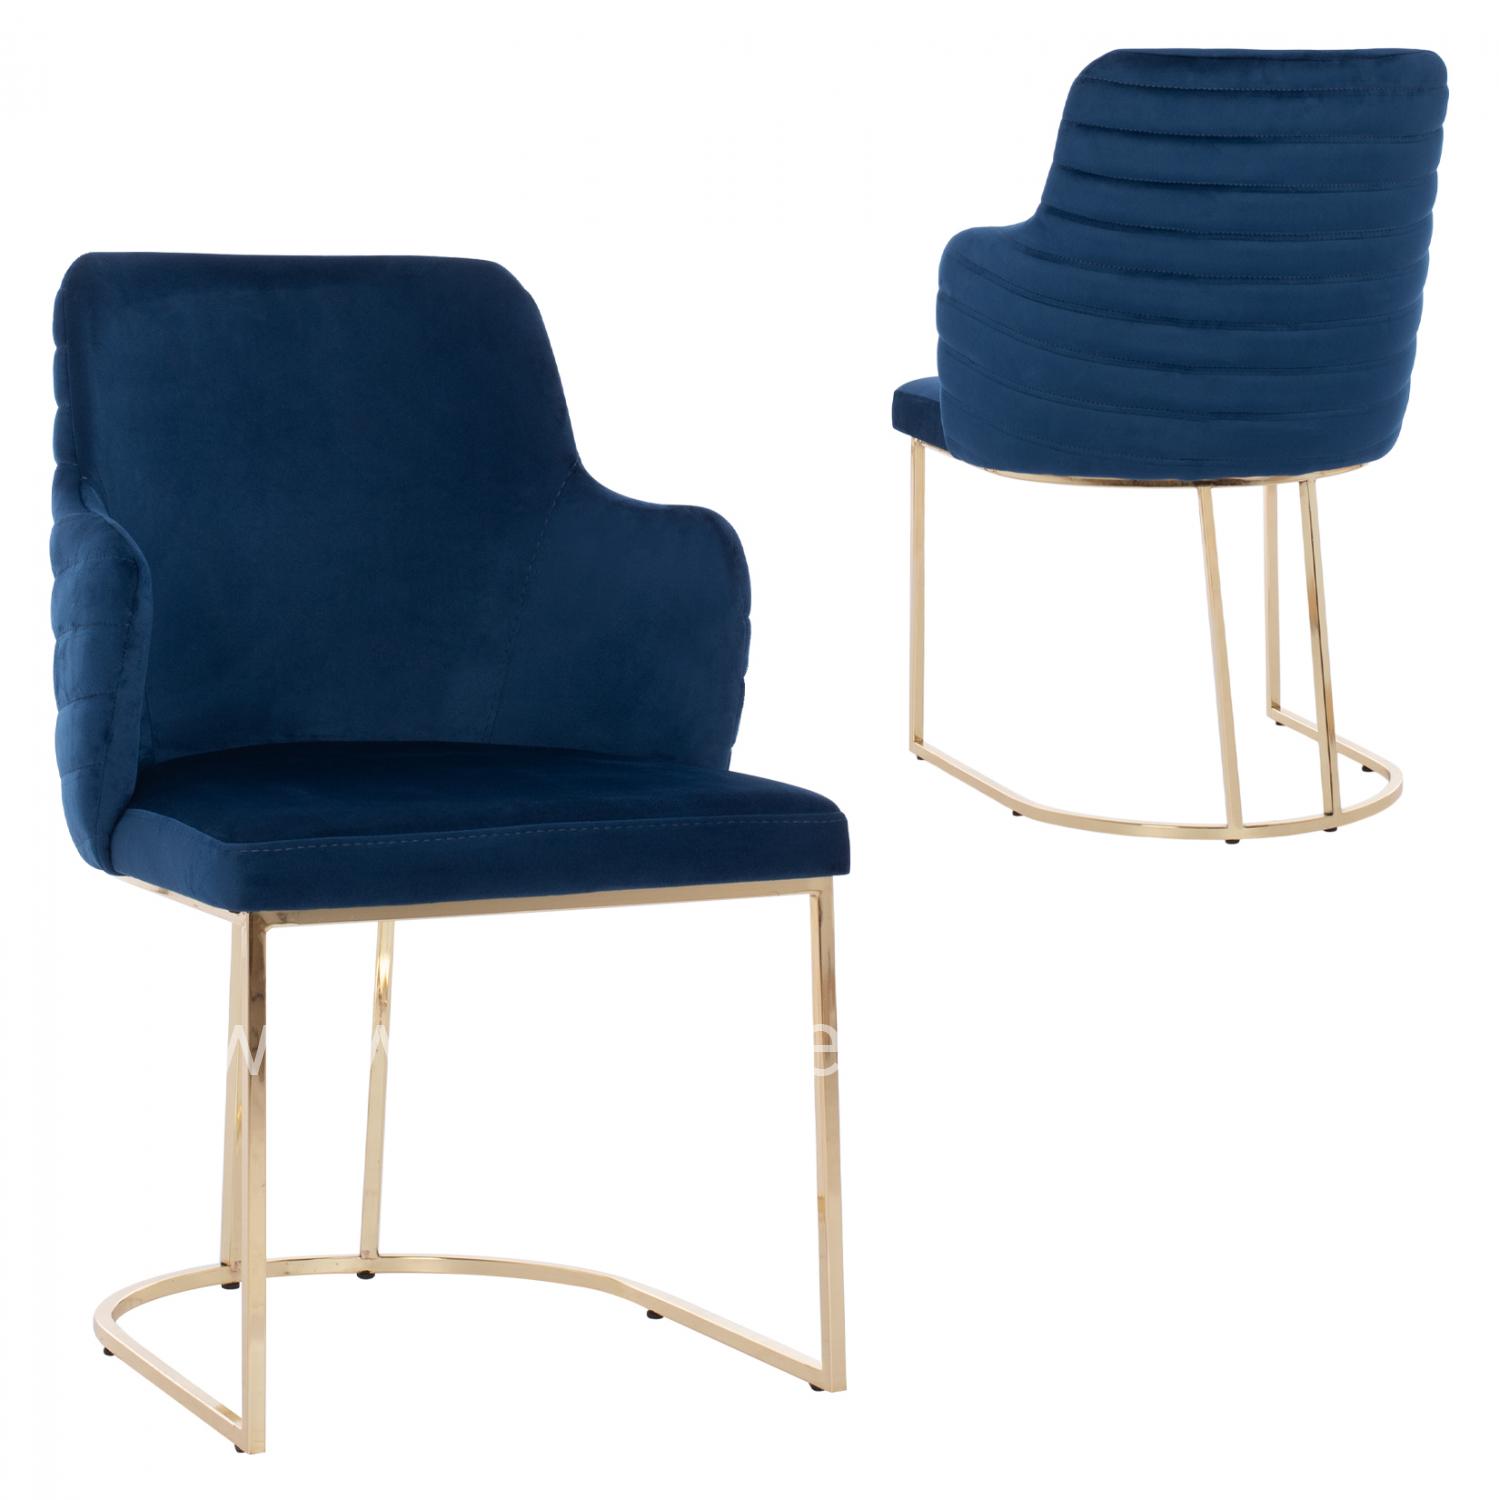 ARMCHAIR “SOLANA” BLUE VELVET WITH METAL LEGS IN GOLD COLOR 54X63X87H CM.